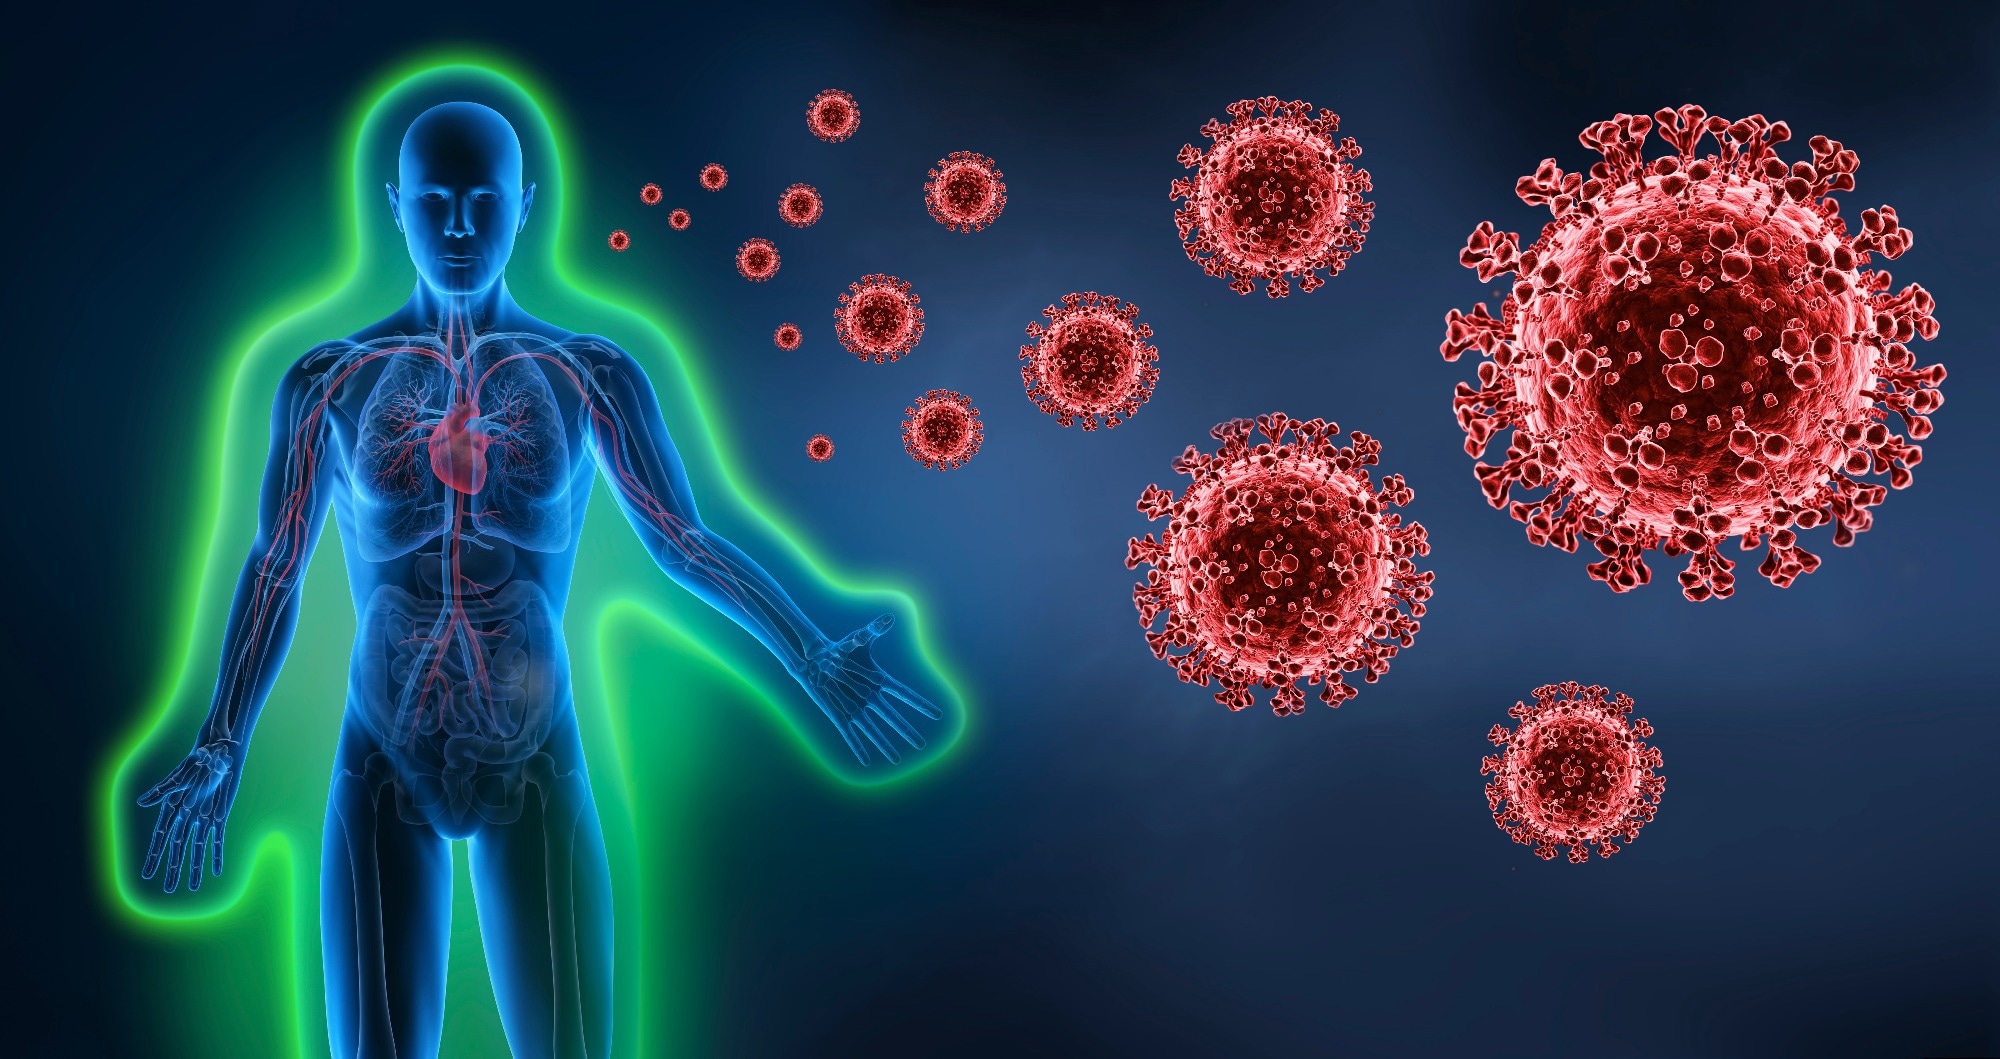 Study: Immune resilience despite inflammatory stress promotes longevity and favorable health outcomes including resistance to infection. Image Credit: peterschreiber.media/Shutterstock.com